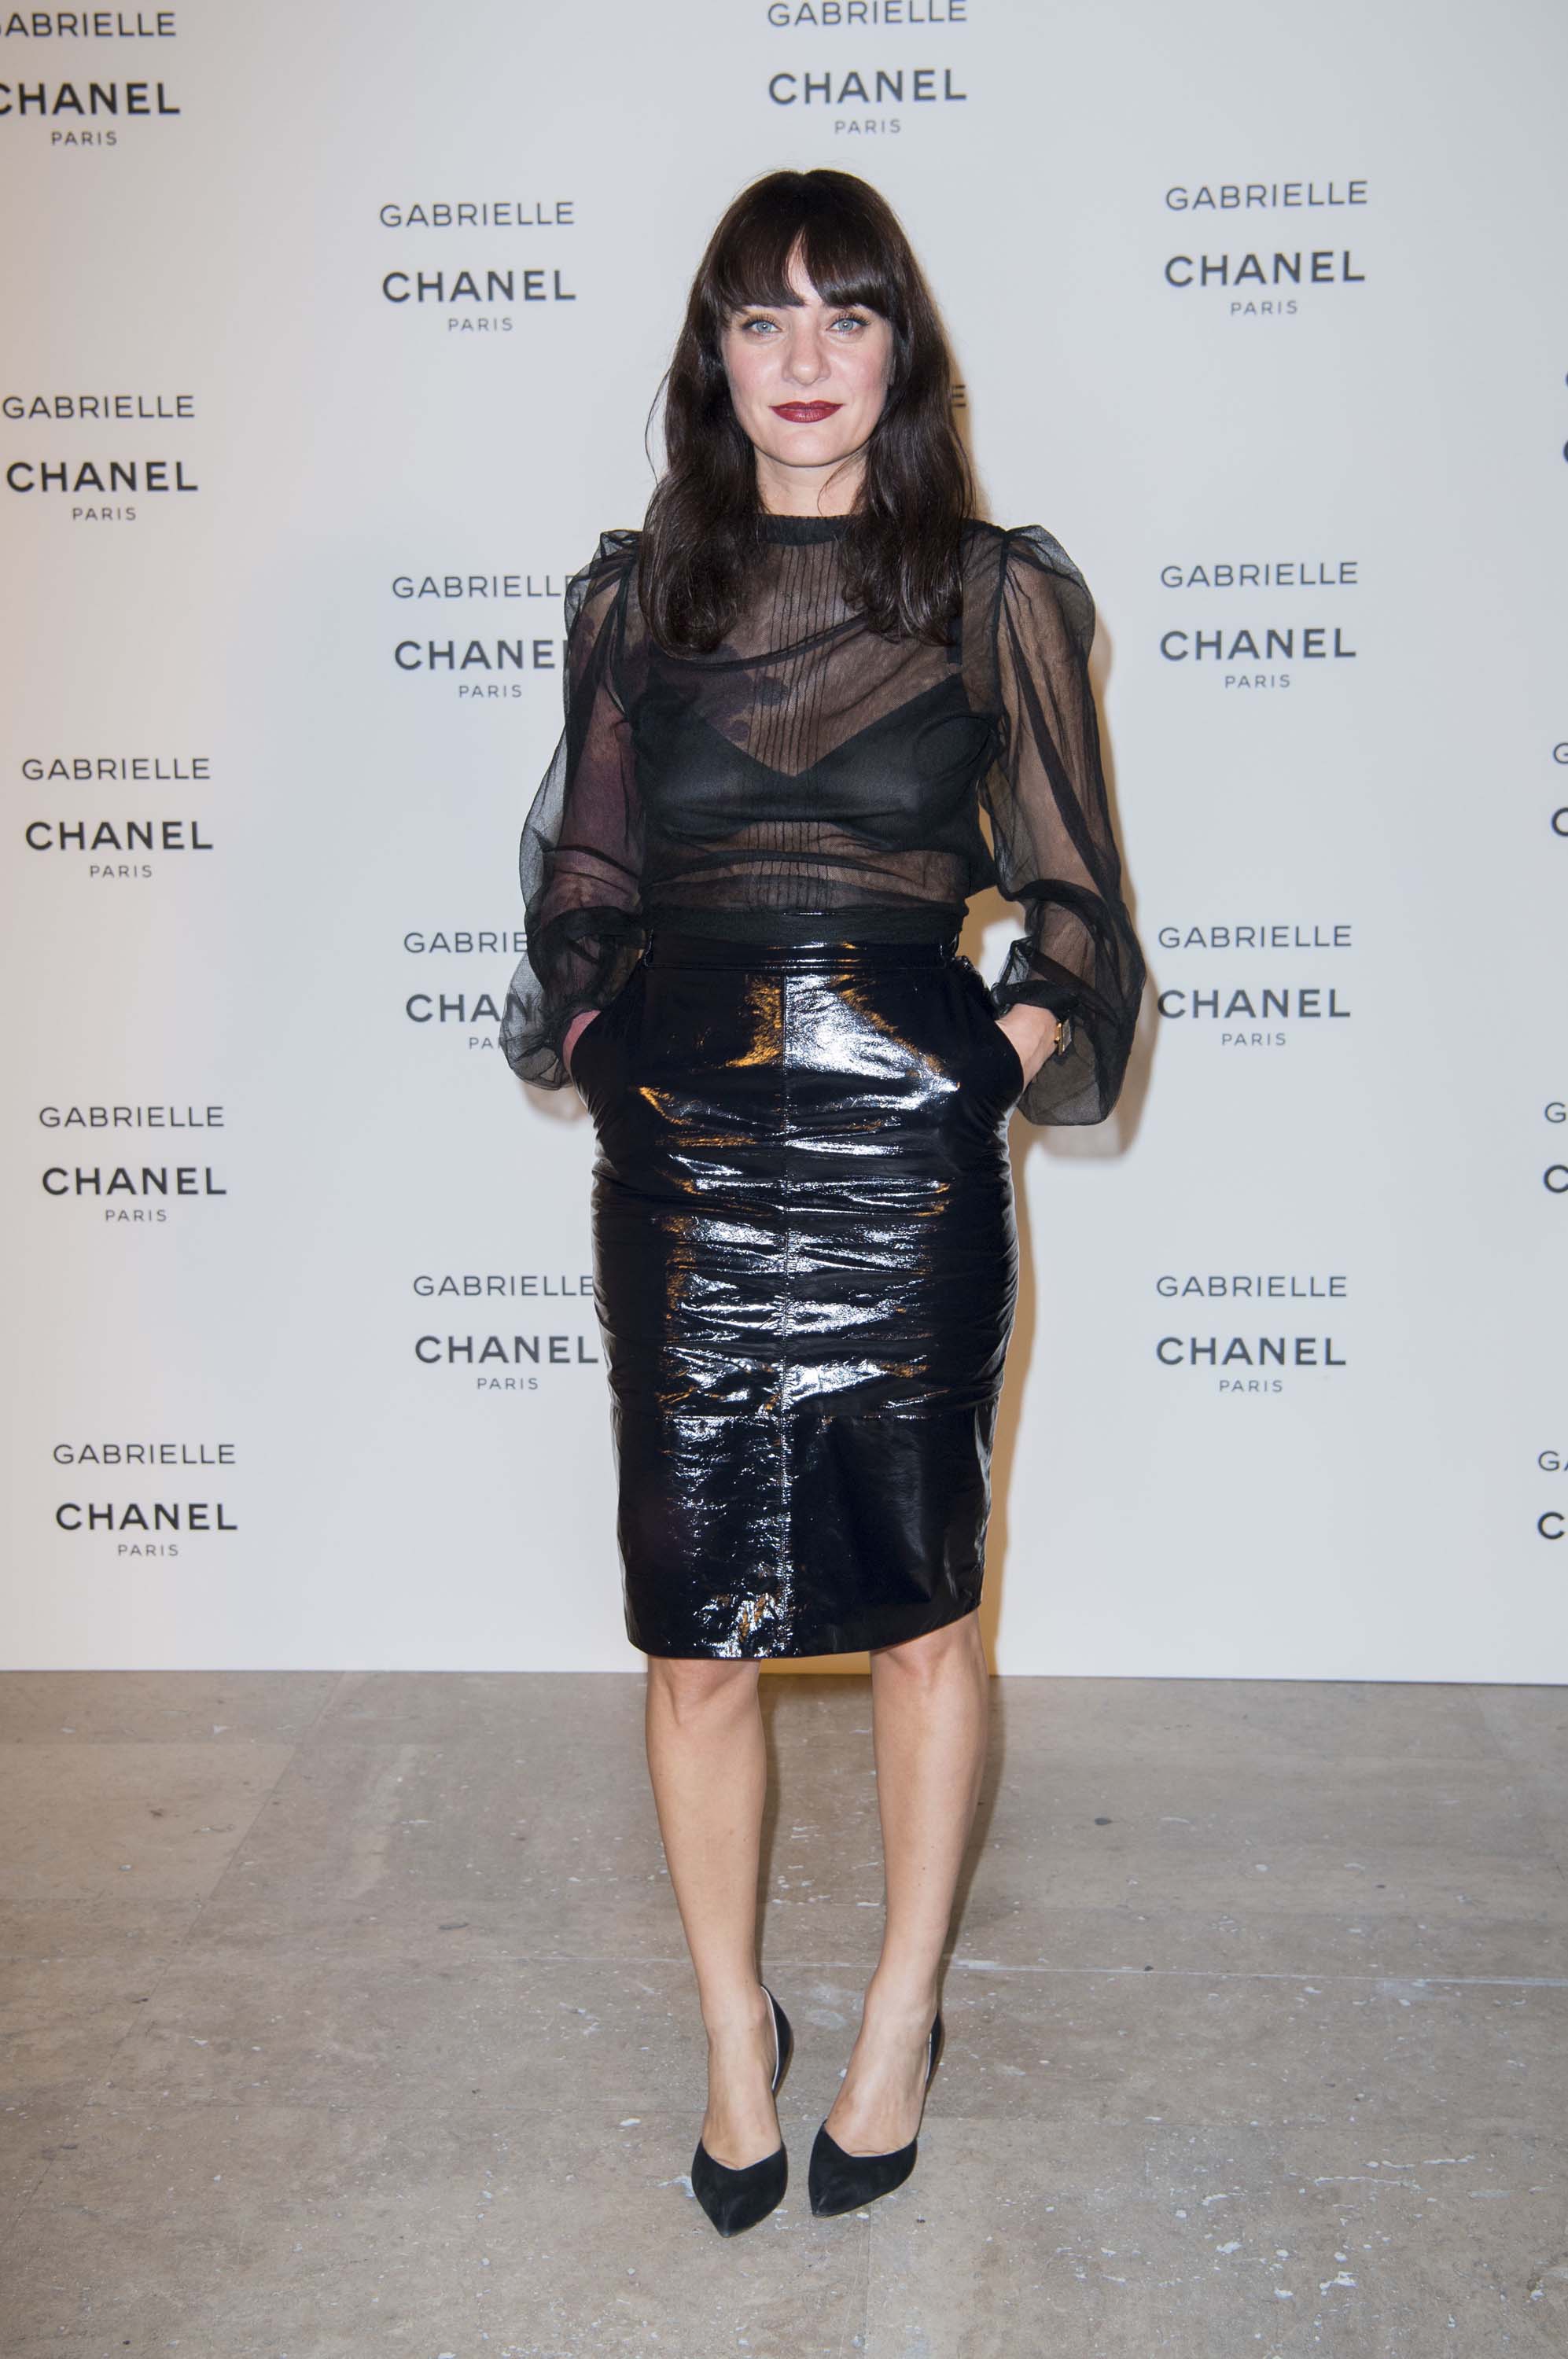 Lucia Pica attends Chanel Perfume Gabrielle Launch Party